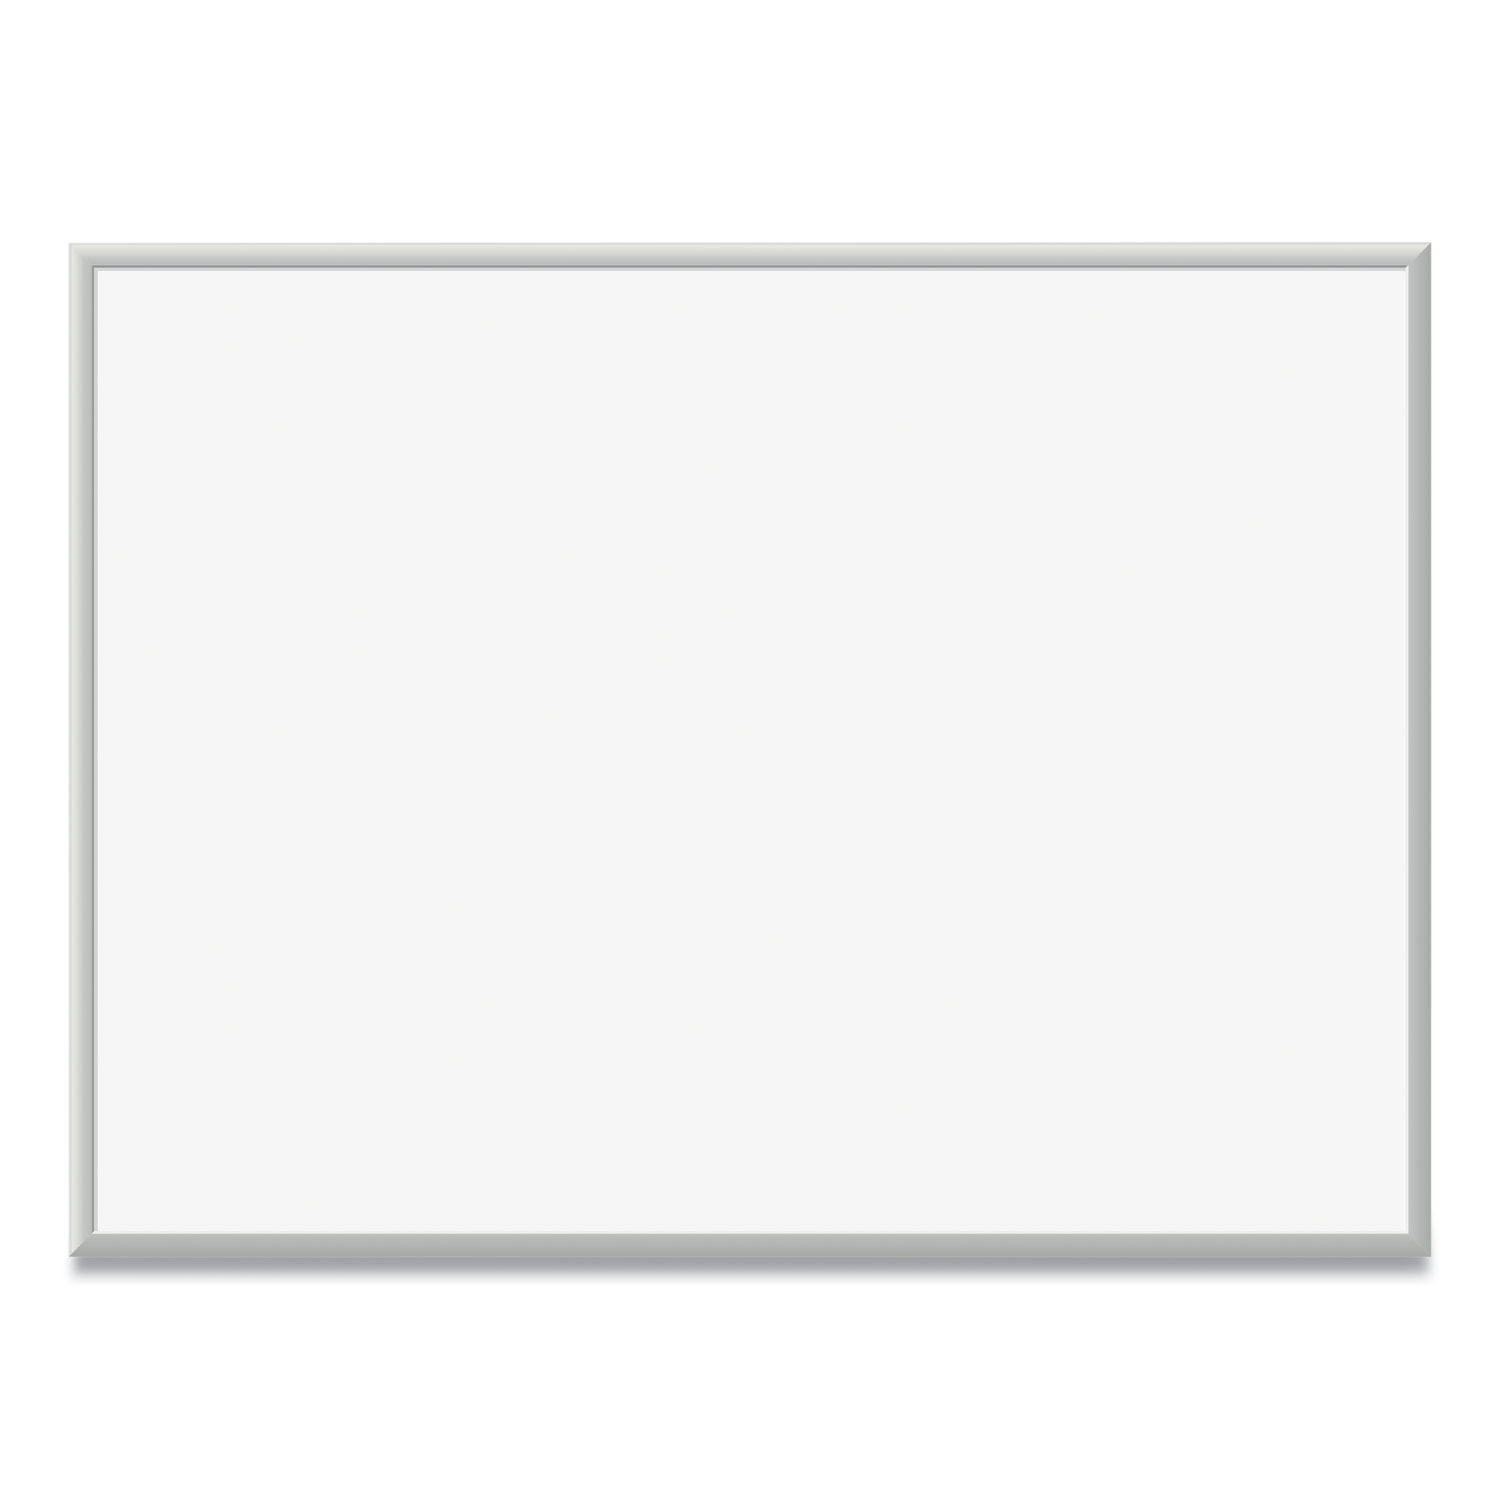 U Brands Magnetic Dry Erase Board with Aluminum Frame, 48 x 36, White Surface, Silver Frame